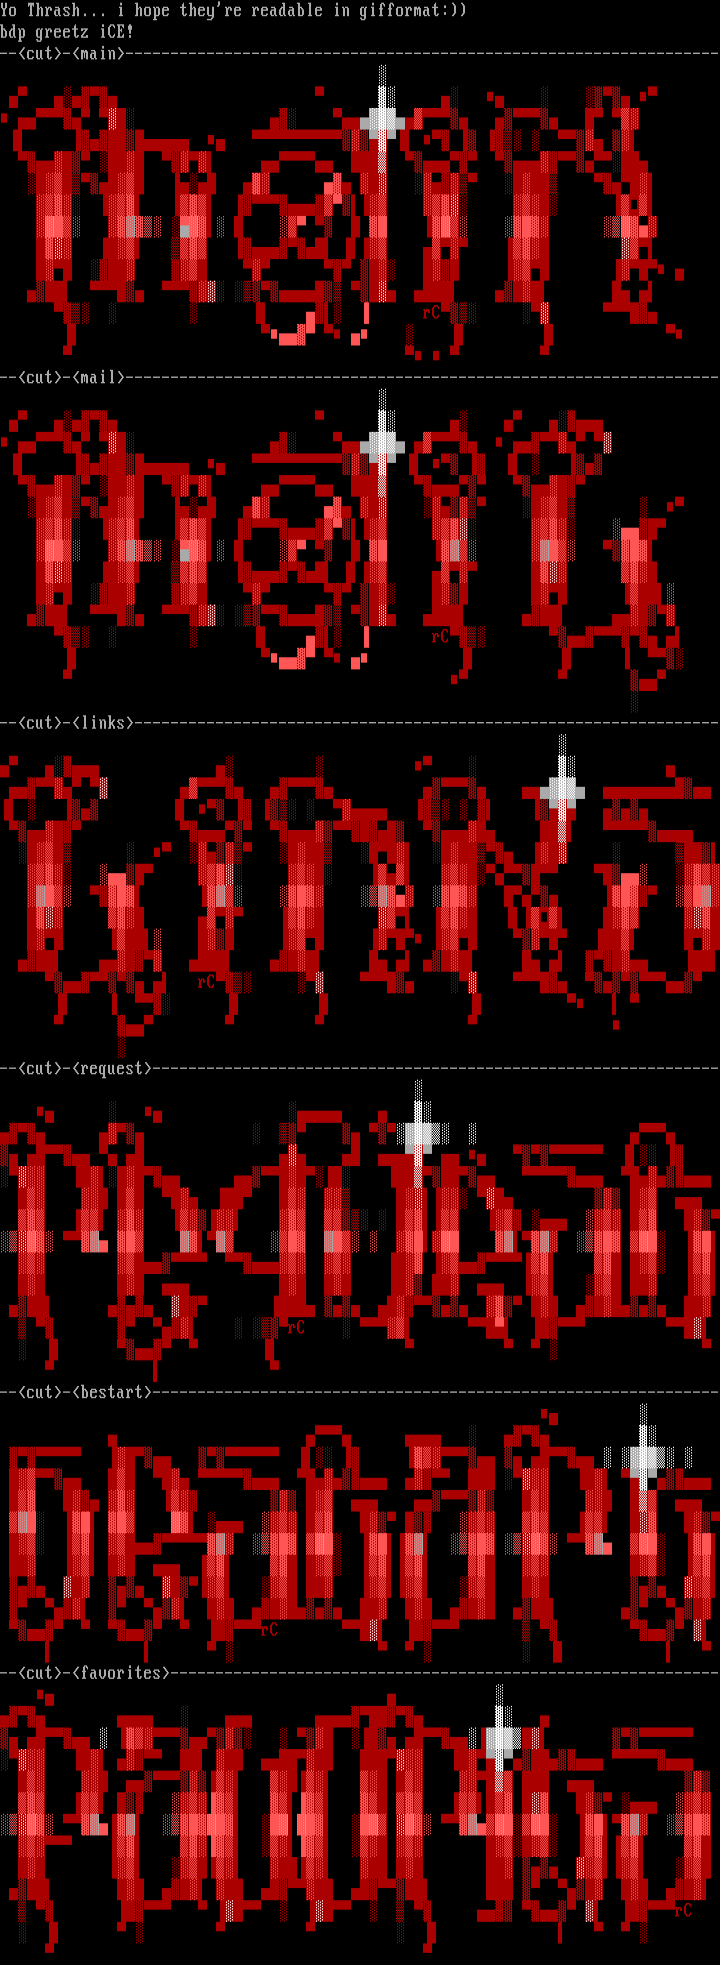 thrashers(fonts) by rotting christ